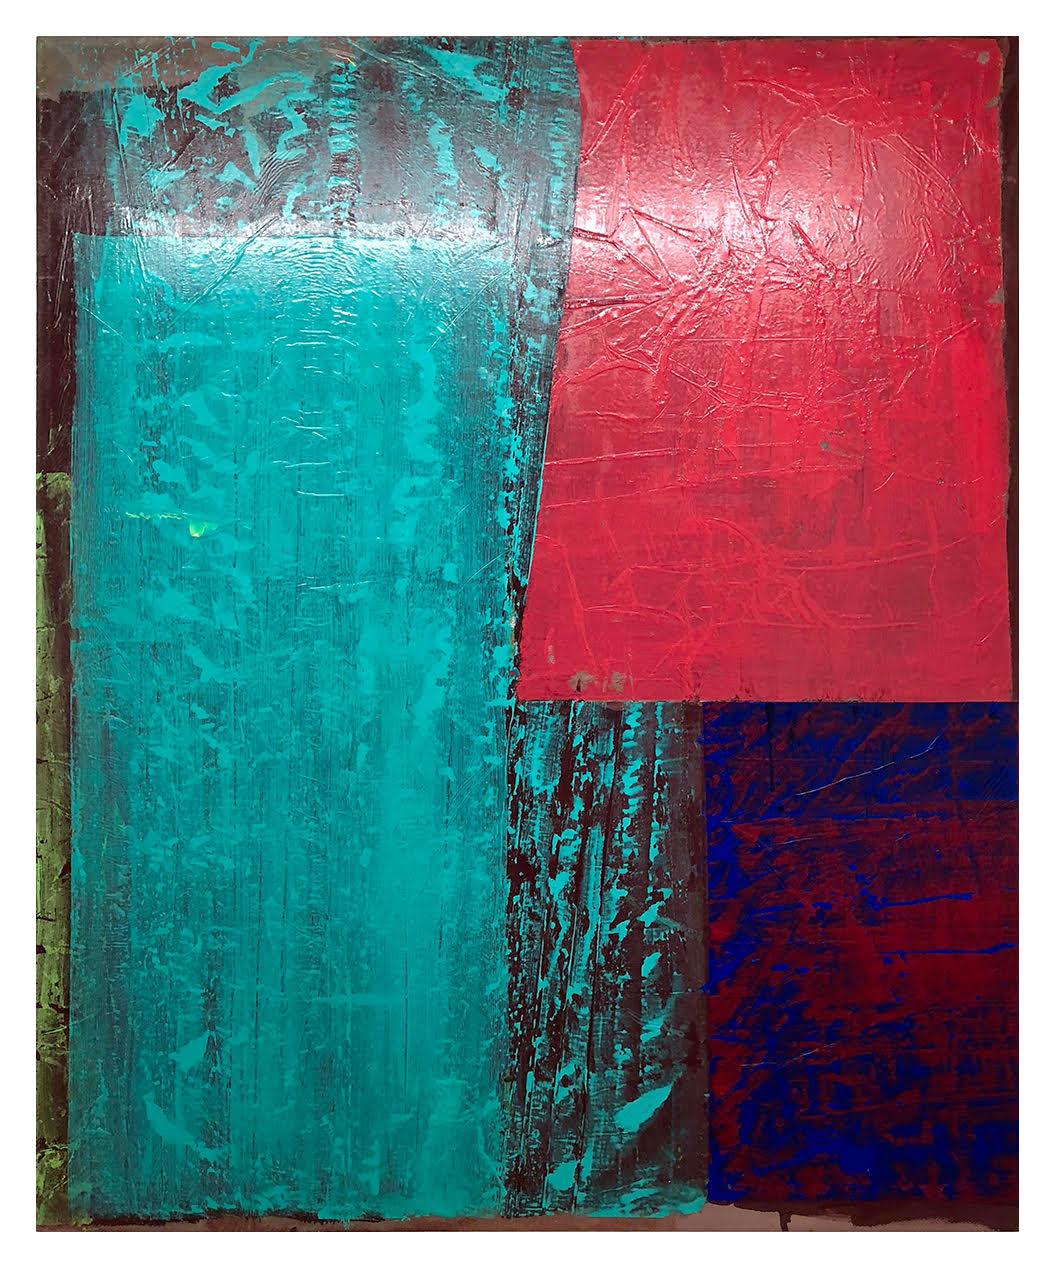 Jeffrey Kurland Abstract Painting - Lucinda River, large, bold geometric abstract w turquoise red glossy textured